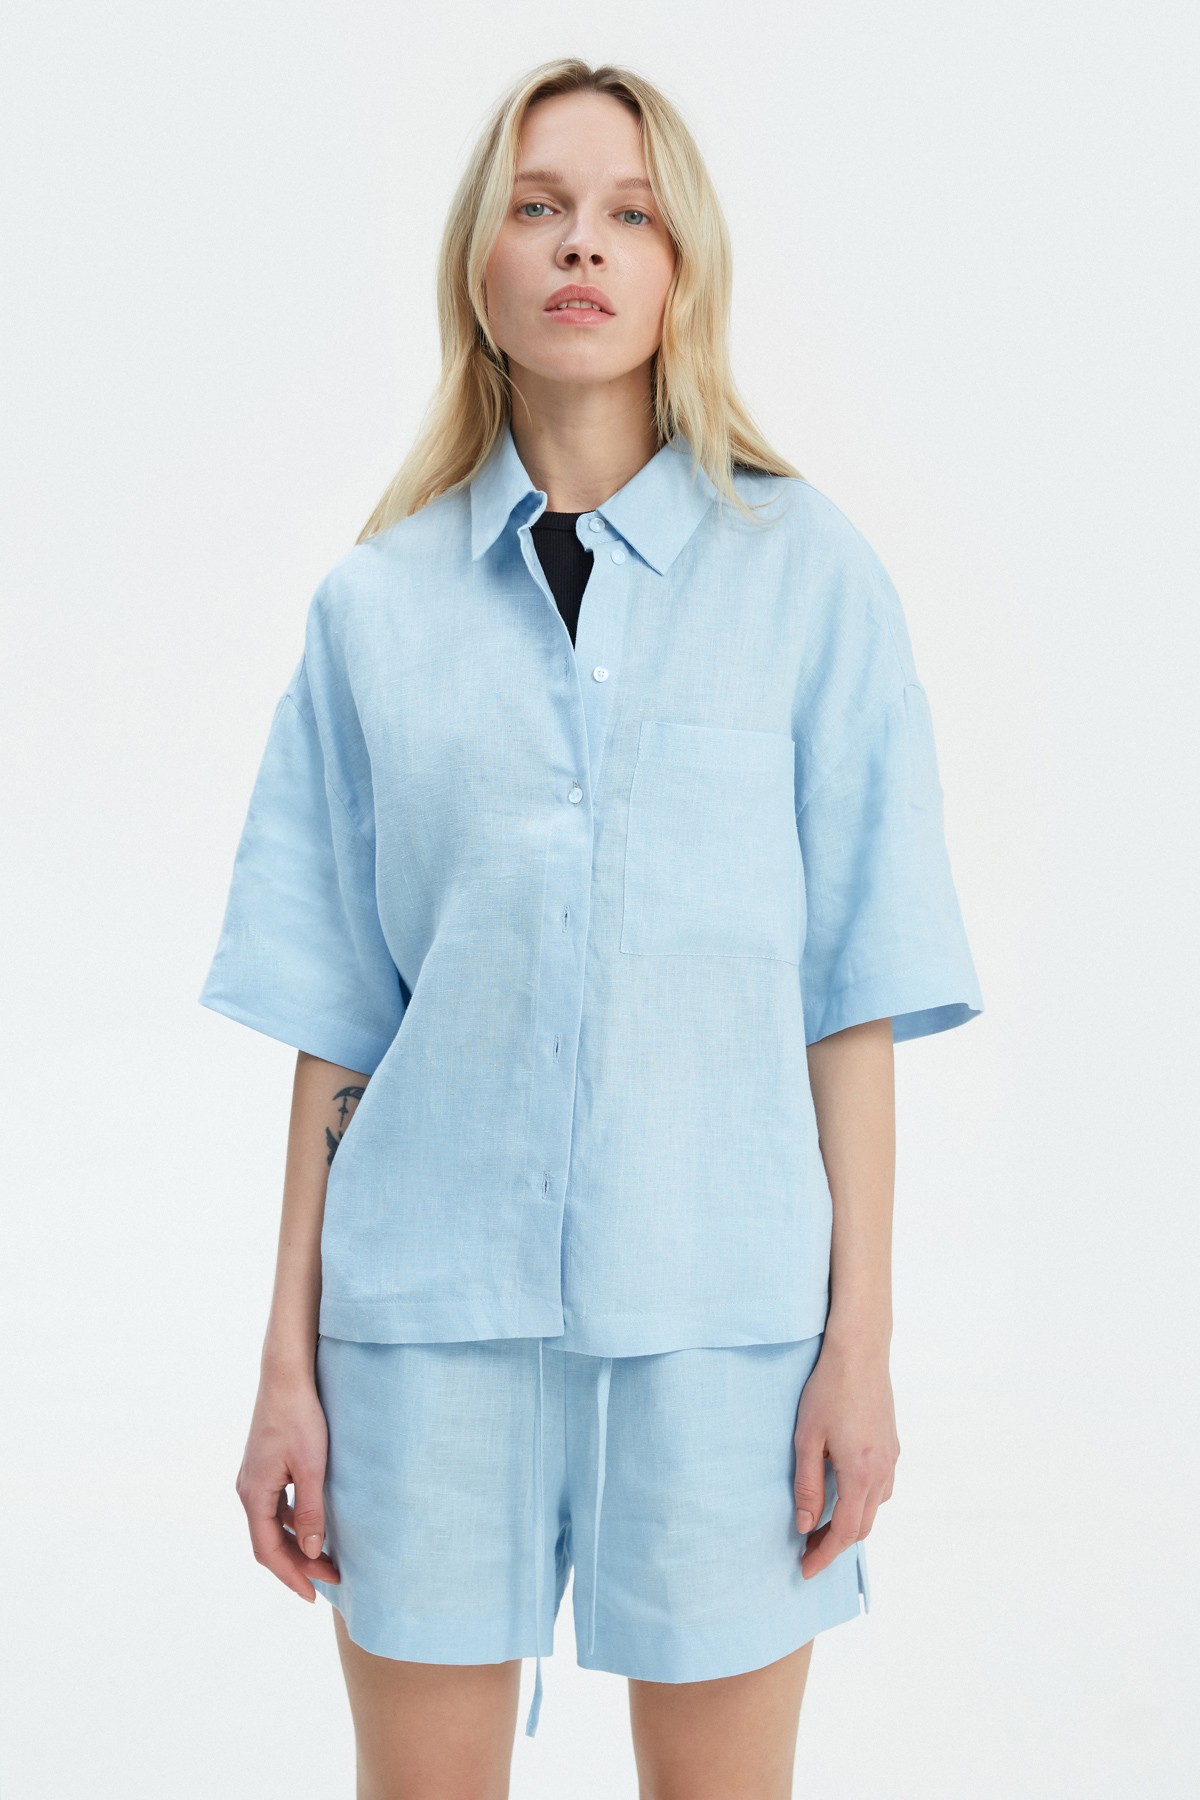 Blue linen shirt with elbow length sleeves